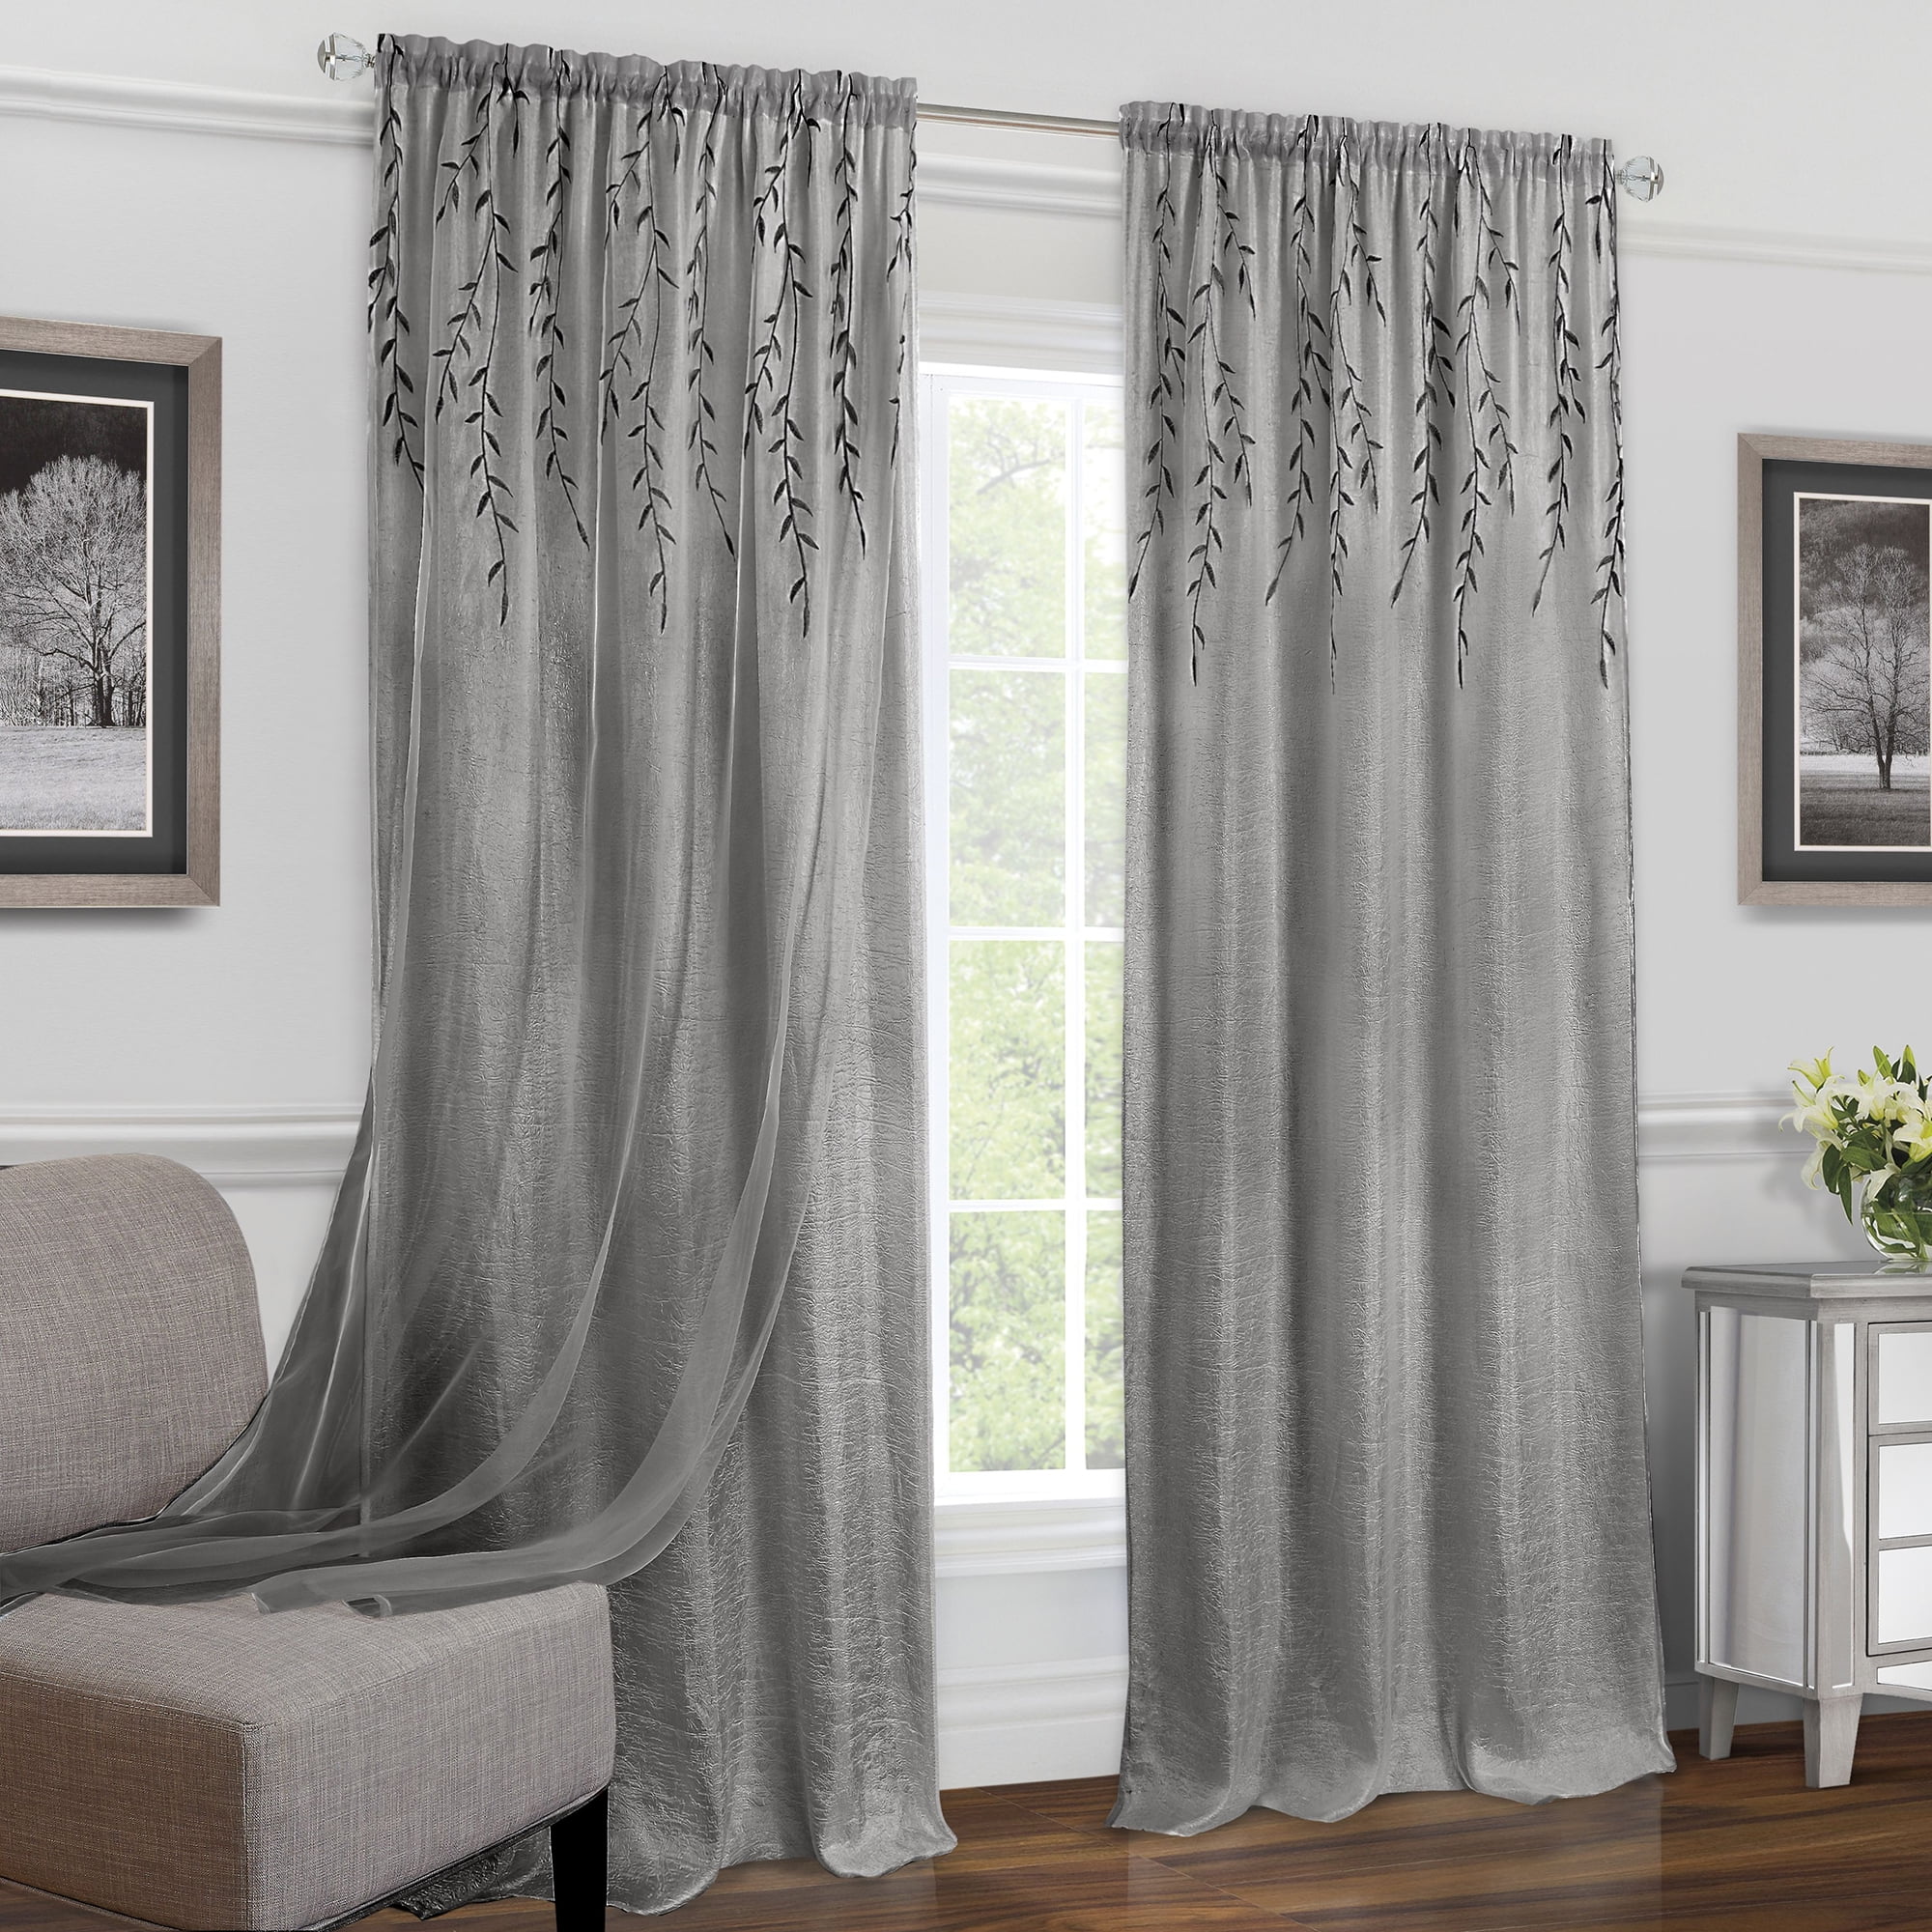 Sheer Voile Rod Pocket Curtain Panel Window Curtains Drapes 50" x 63" Gray 